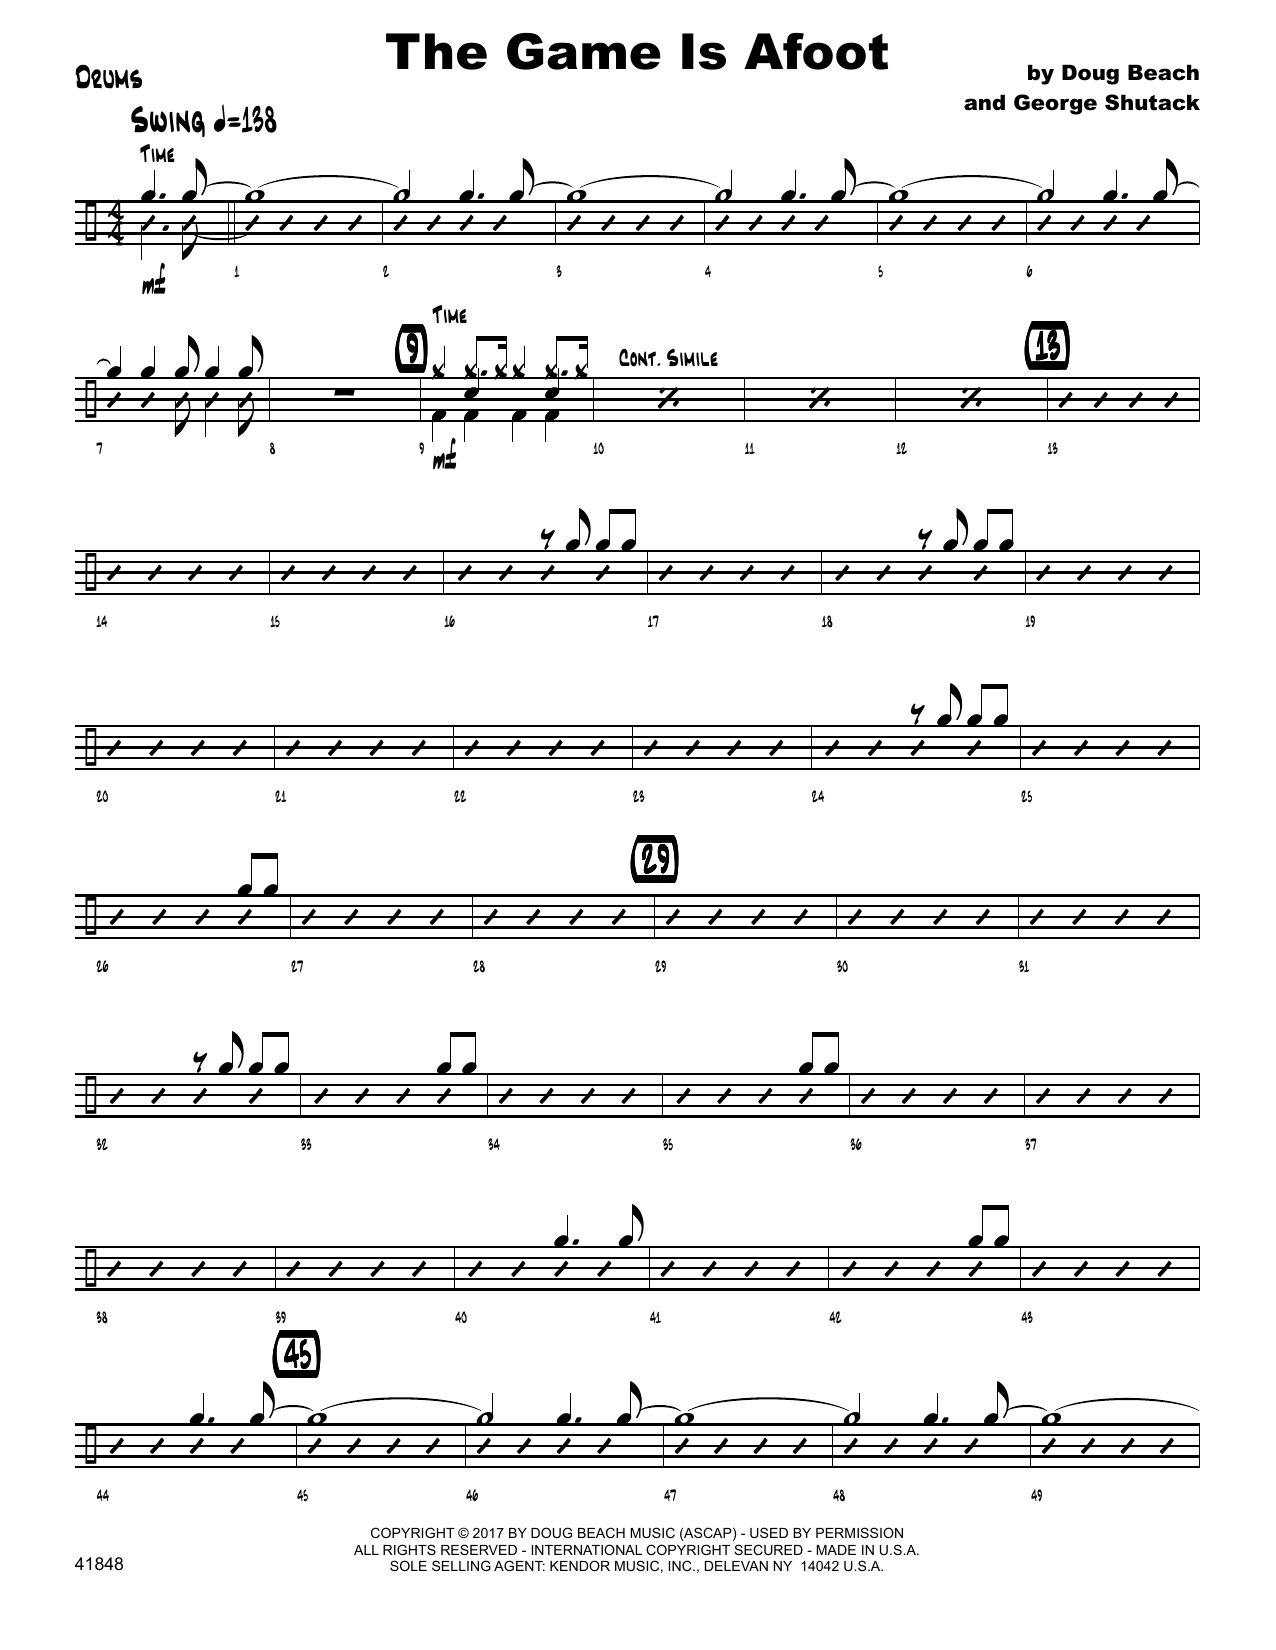 Download Doug Beach & George Shutack The Game Is Afoot - Drum Set Sheet Music